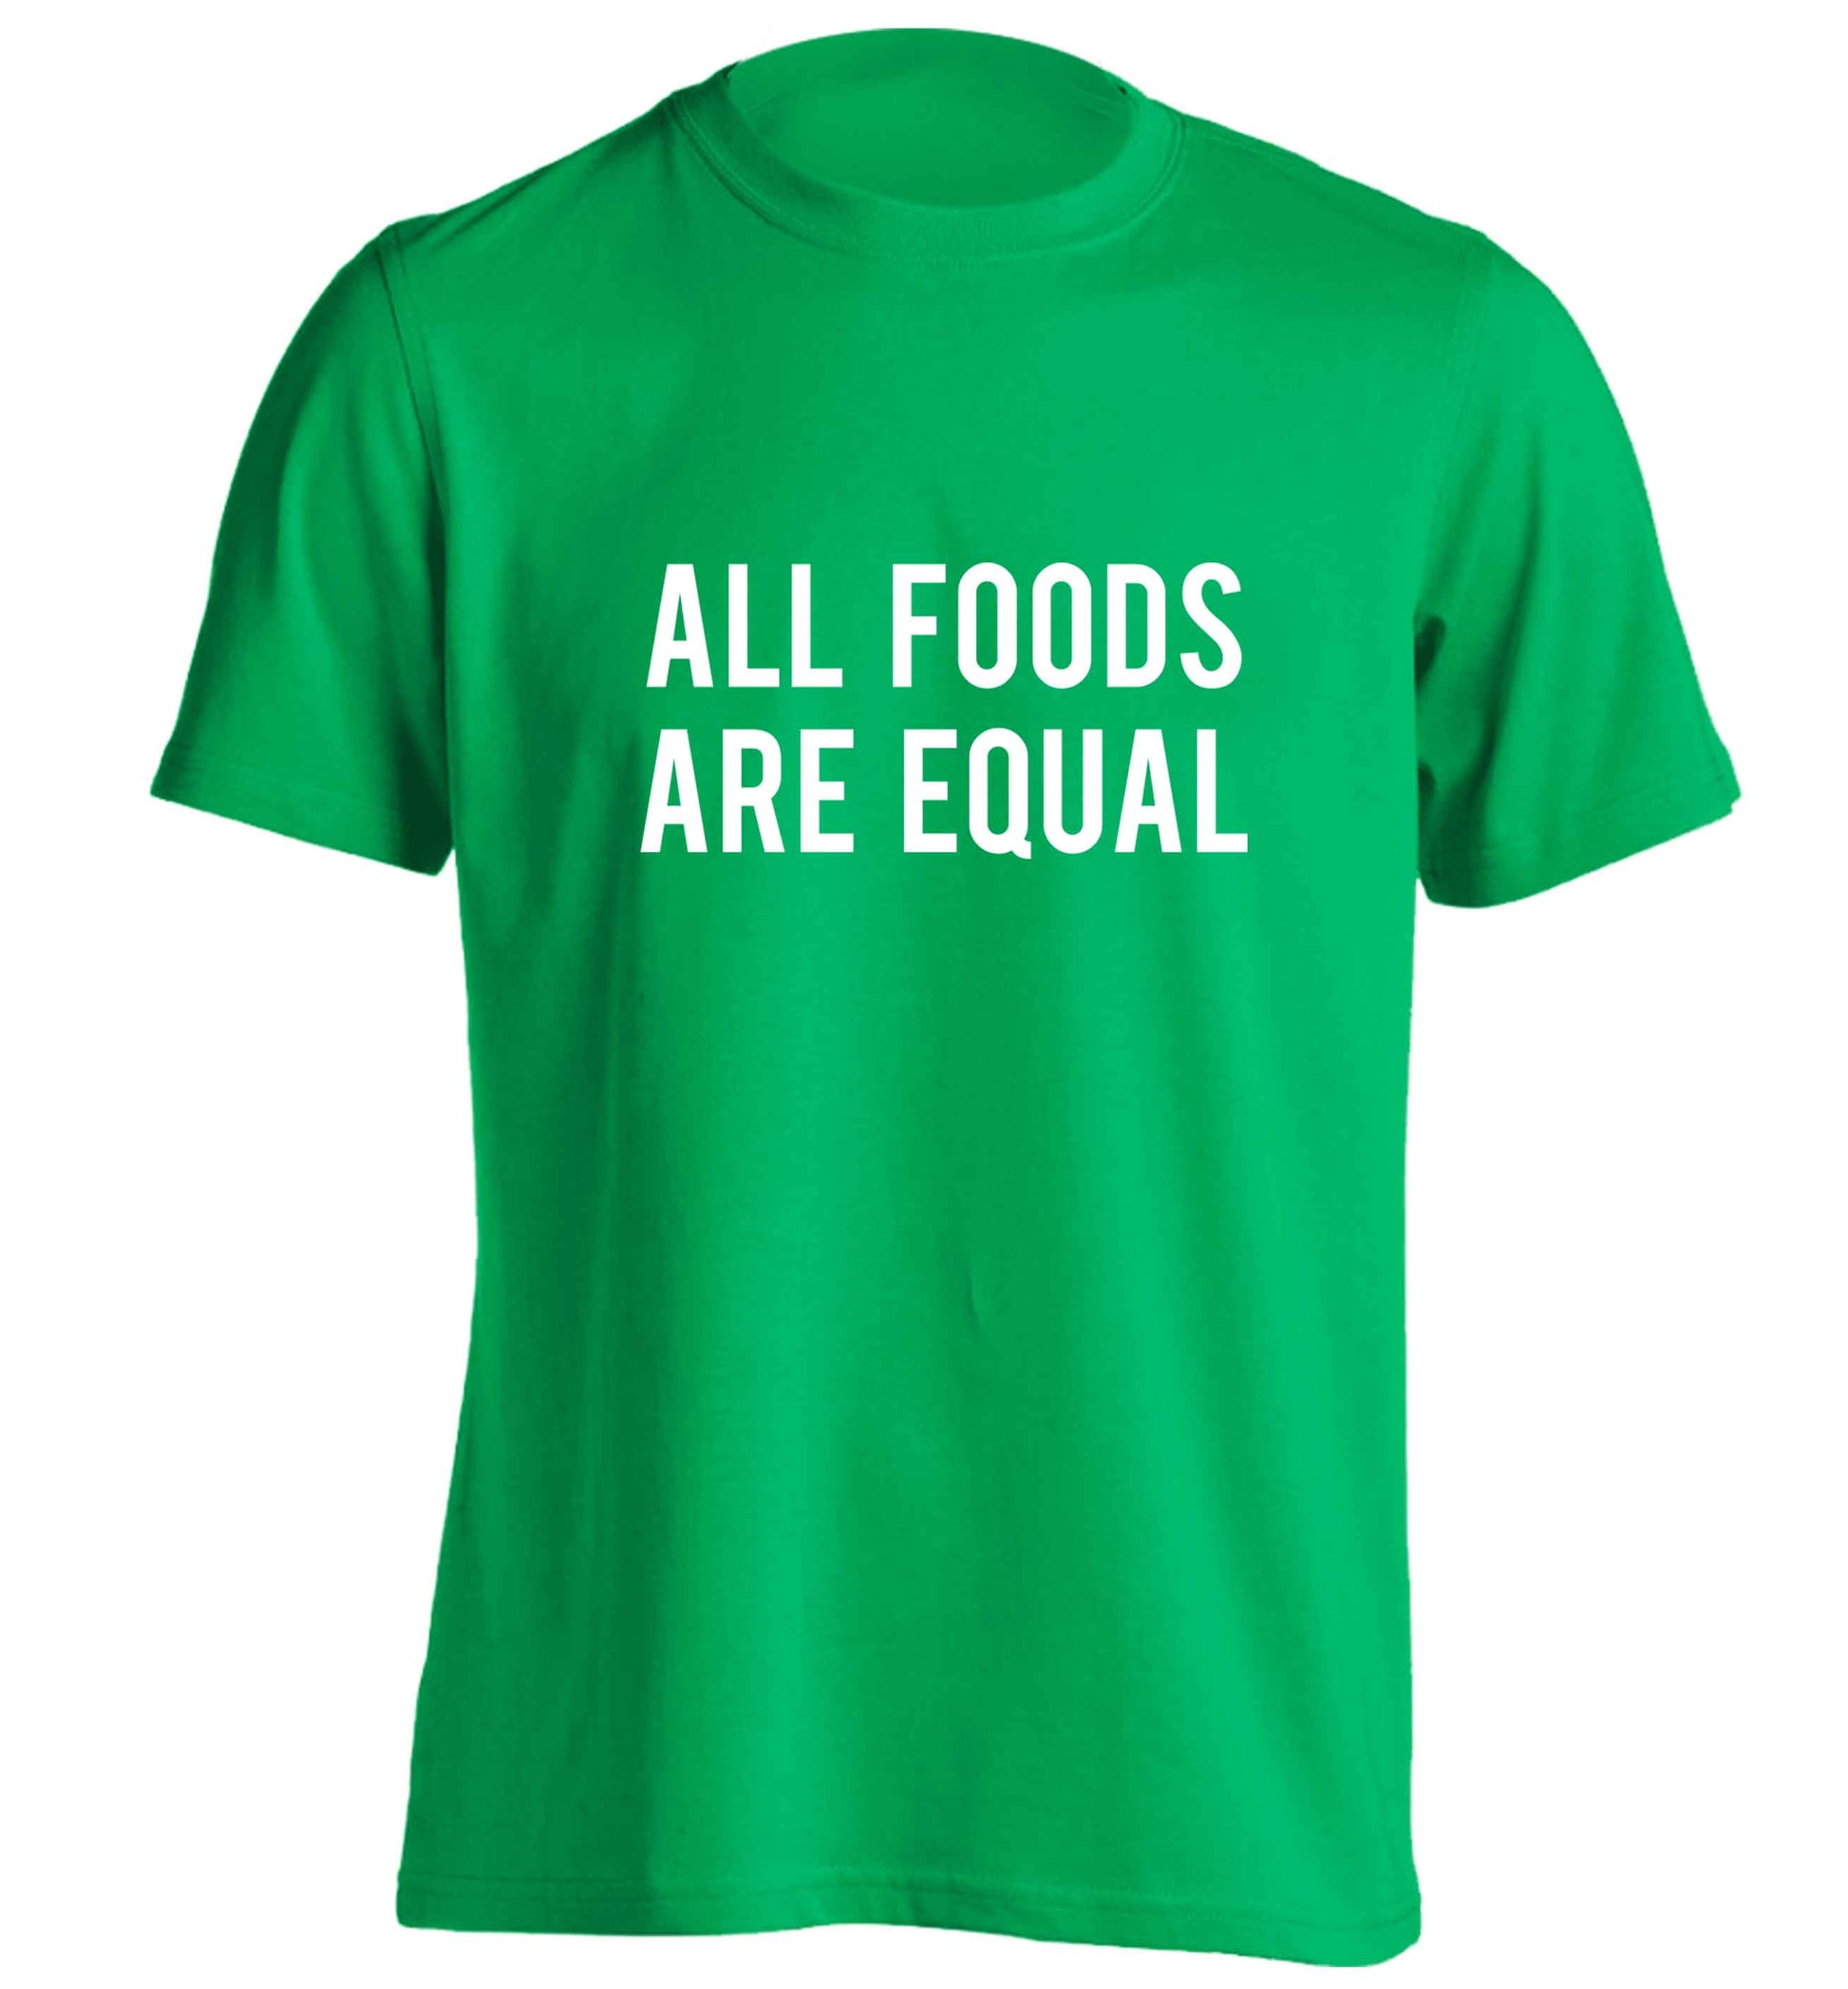 All foods are equal adults unisex green Tshirt 2XL